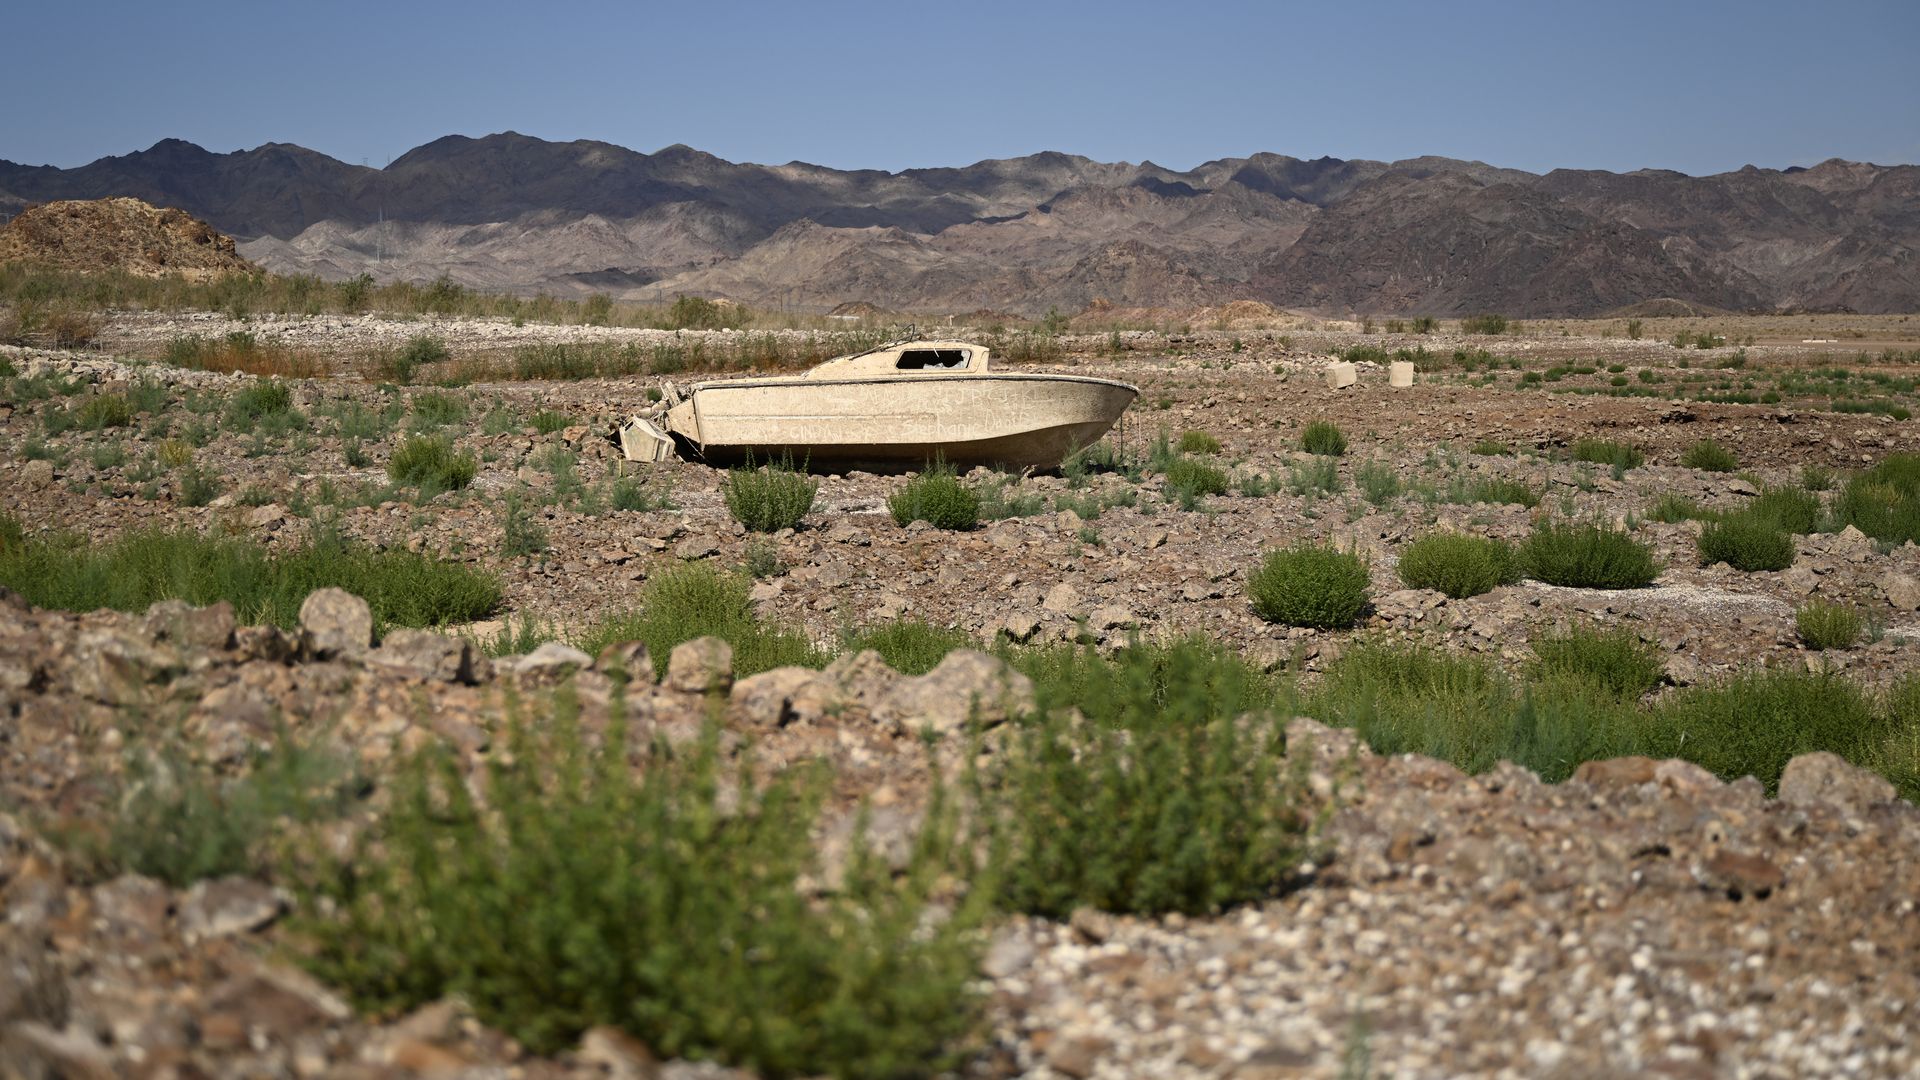  A sunken boat emerges on the shore at Lake Mead after water levels drop due to prolonged drought on August 18, 2022 near Boulder City, Nevada. 